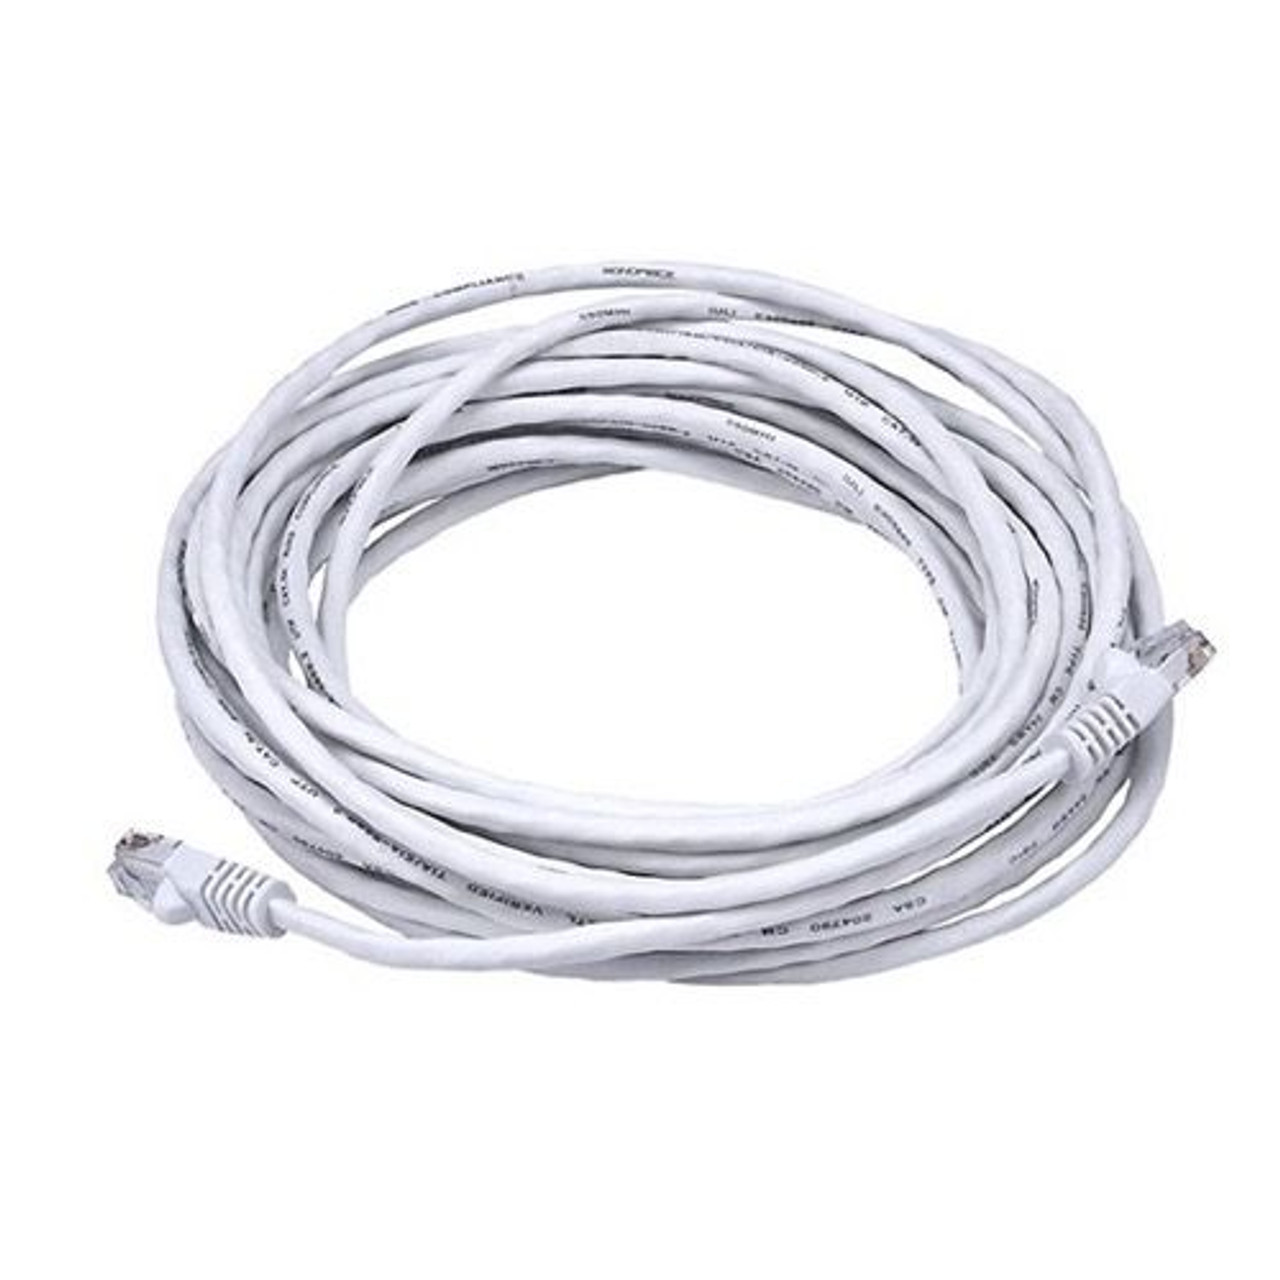 Eagle 10' FT CAT5e Patch Cord Cable White UTP 350 MHz Snagless RJ45 Each End Gold Network Ethernet Booted RJ-45 24 AWG Copper Stranded Enhanced Category 5e High Speed Data Computer Gaming Jumper